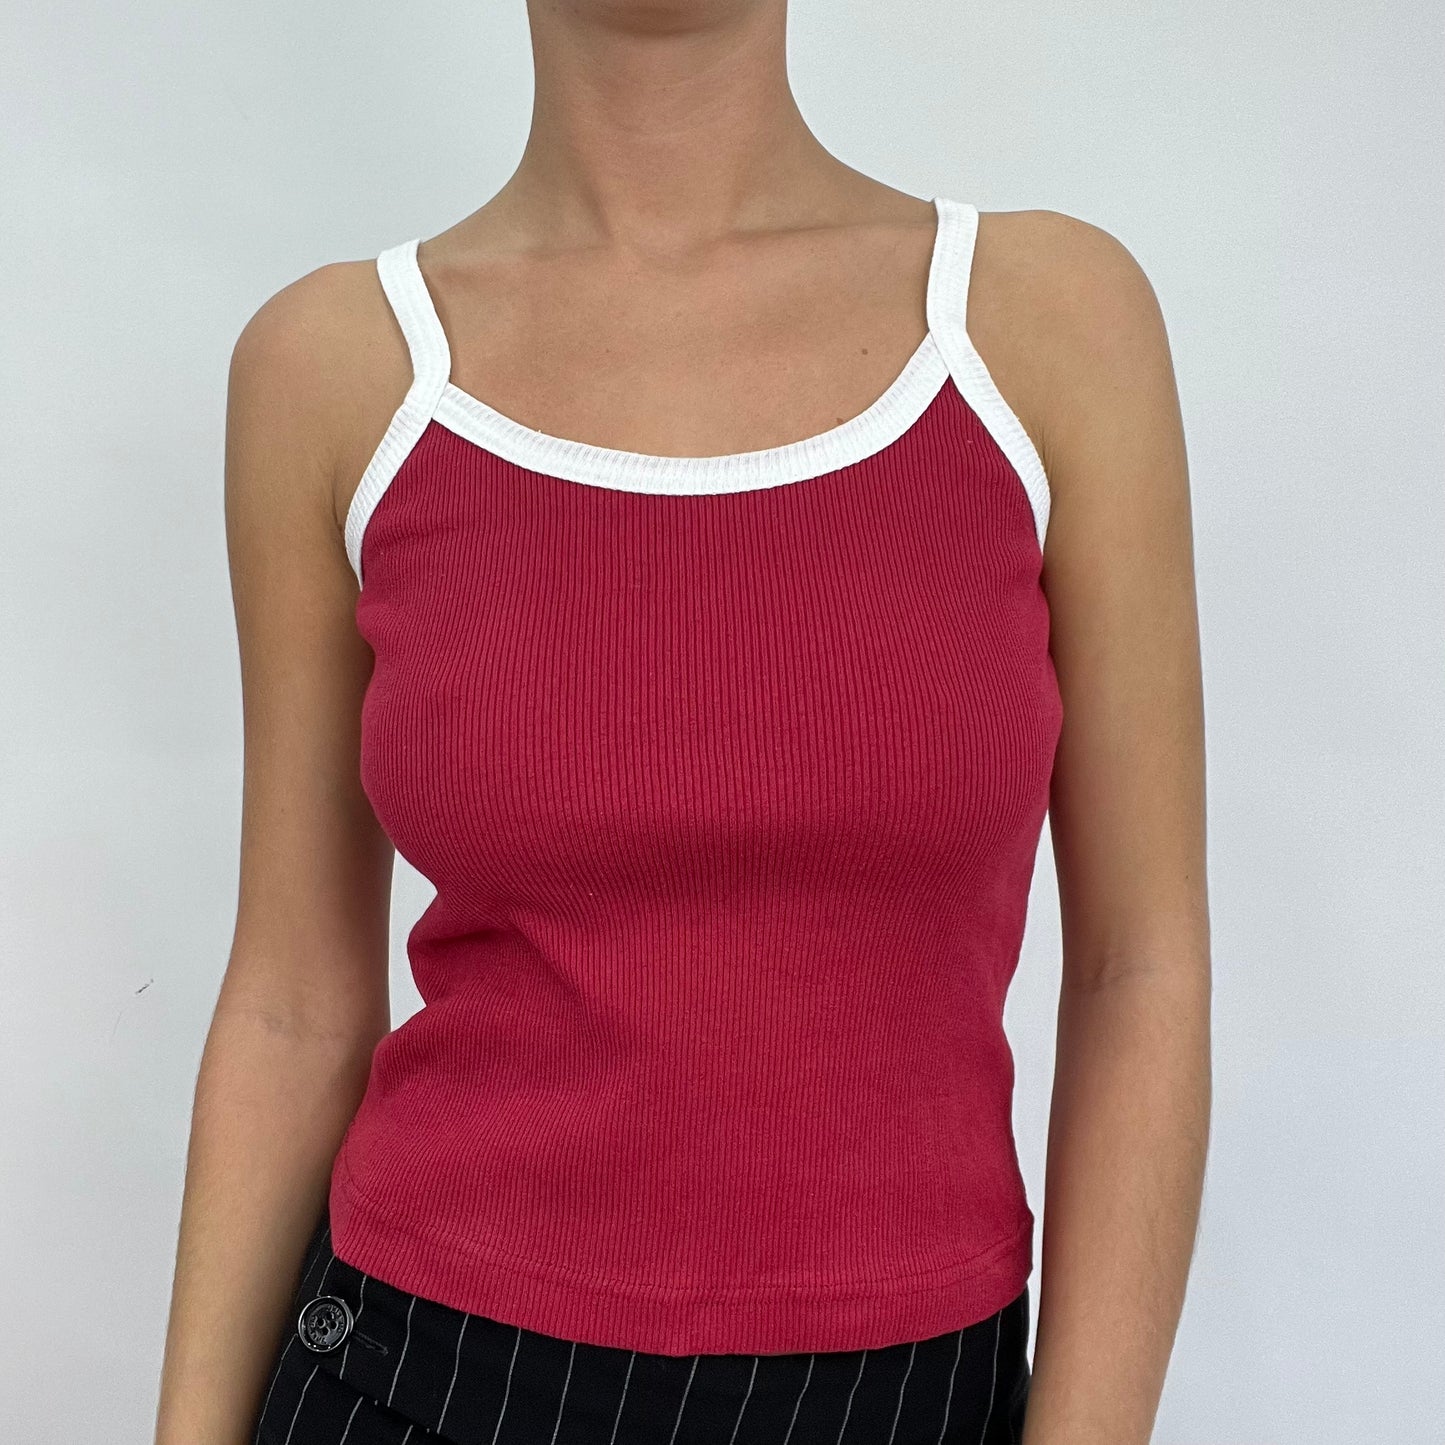 CARRIE BRADSHAW DROP | small red cami with white straps